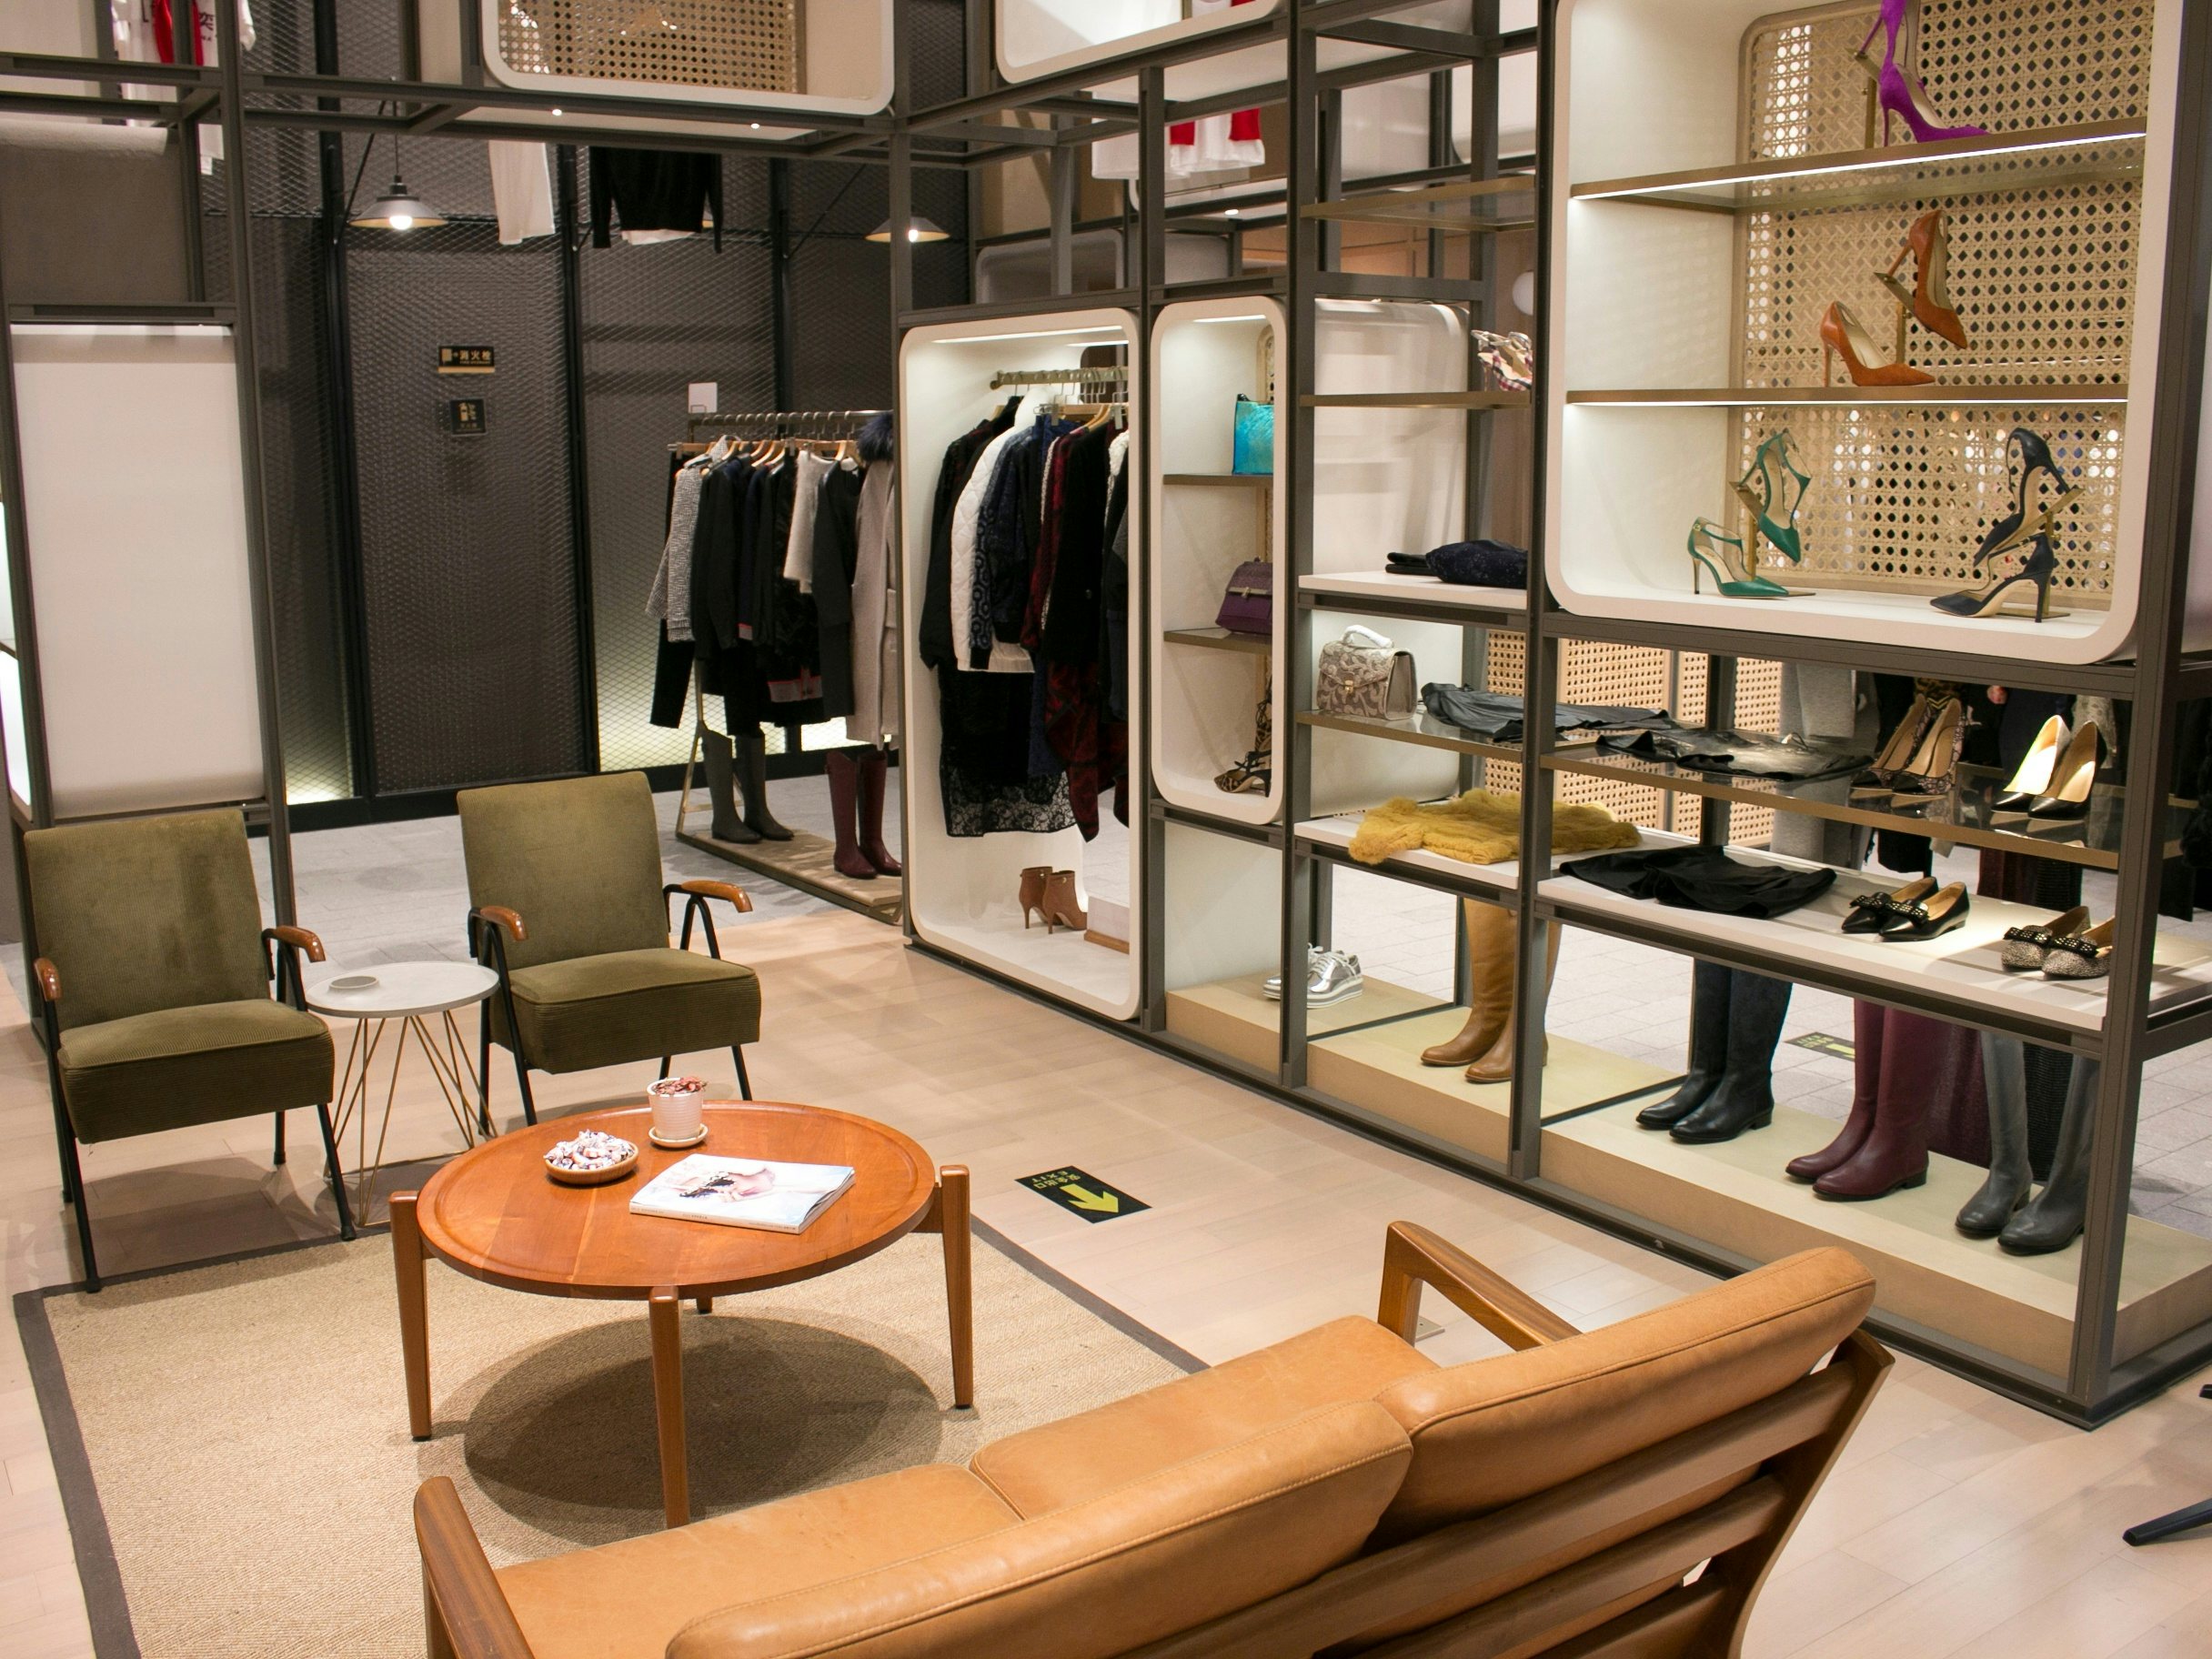 Chuang x Yi boutique in Shanghai Village uses its platform to help promote the local fashion industry to China's affluent consumers. (Courtesy Photo)